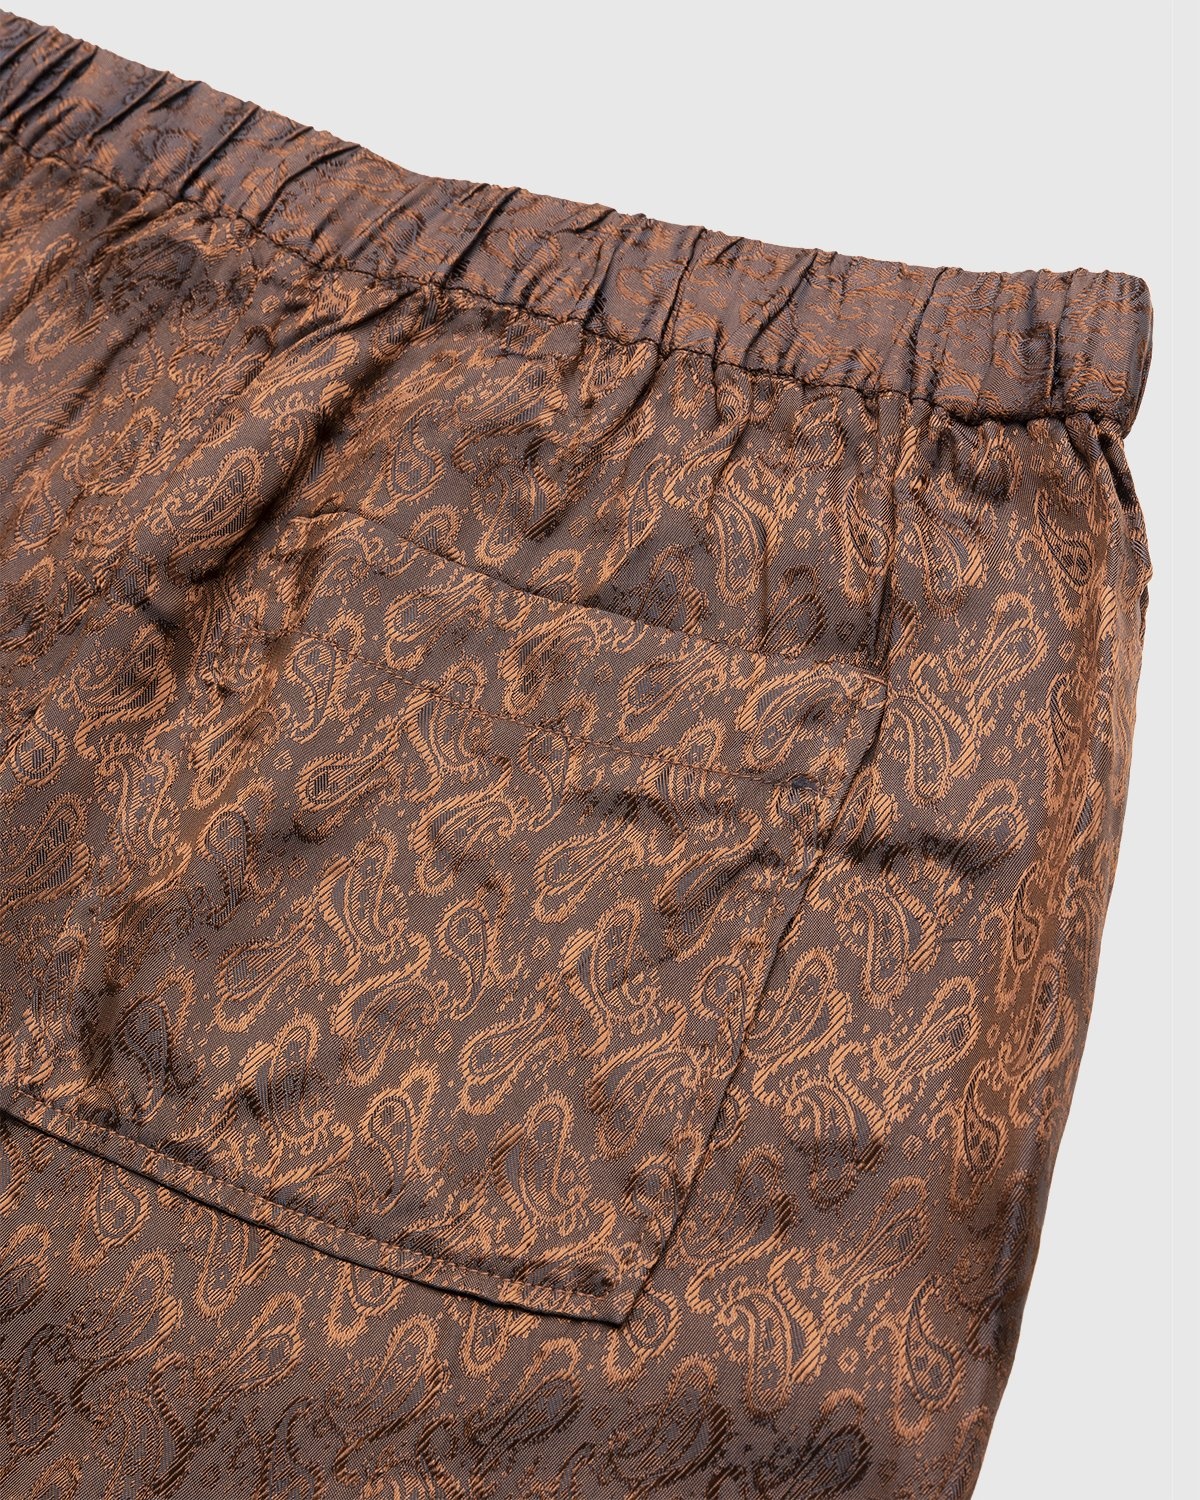 Acne Studios – Jacquard Trousers Brown - Trousers - Brown - Image 3